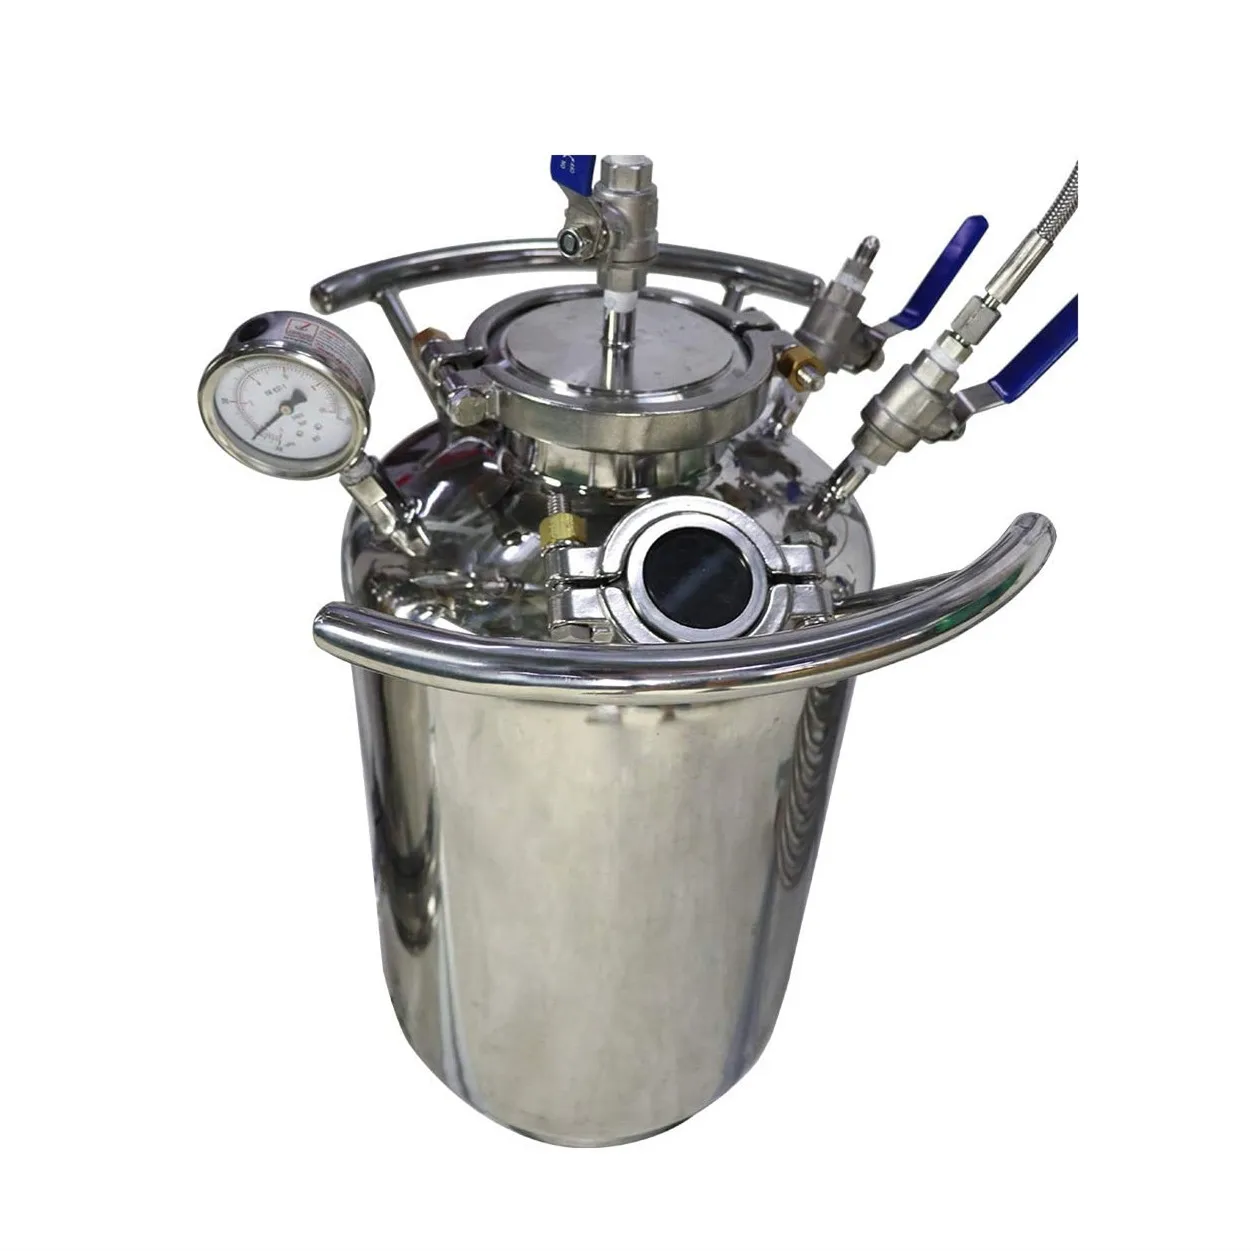 Used To Extract from Plant Leaves 2LB Closed Loop Extractor for High Safety Industrial Equipment 